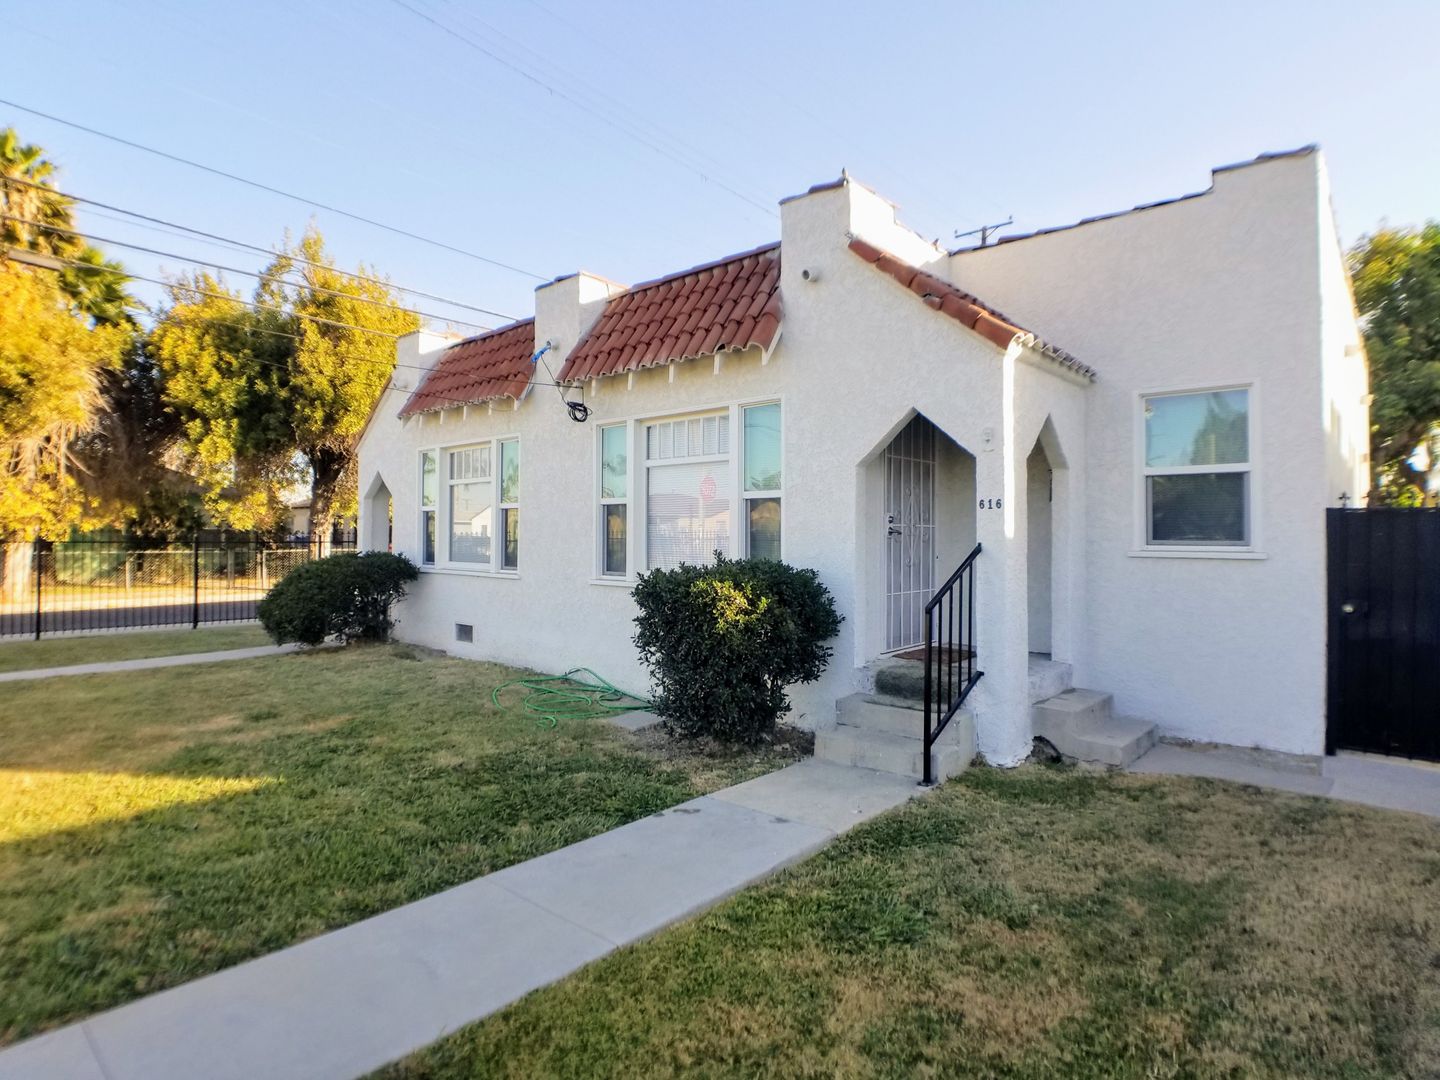 Property Listing For 01/06/2021